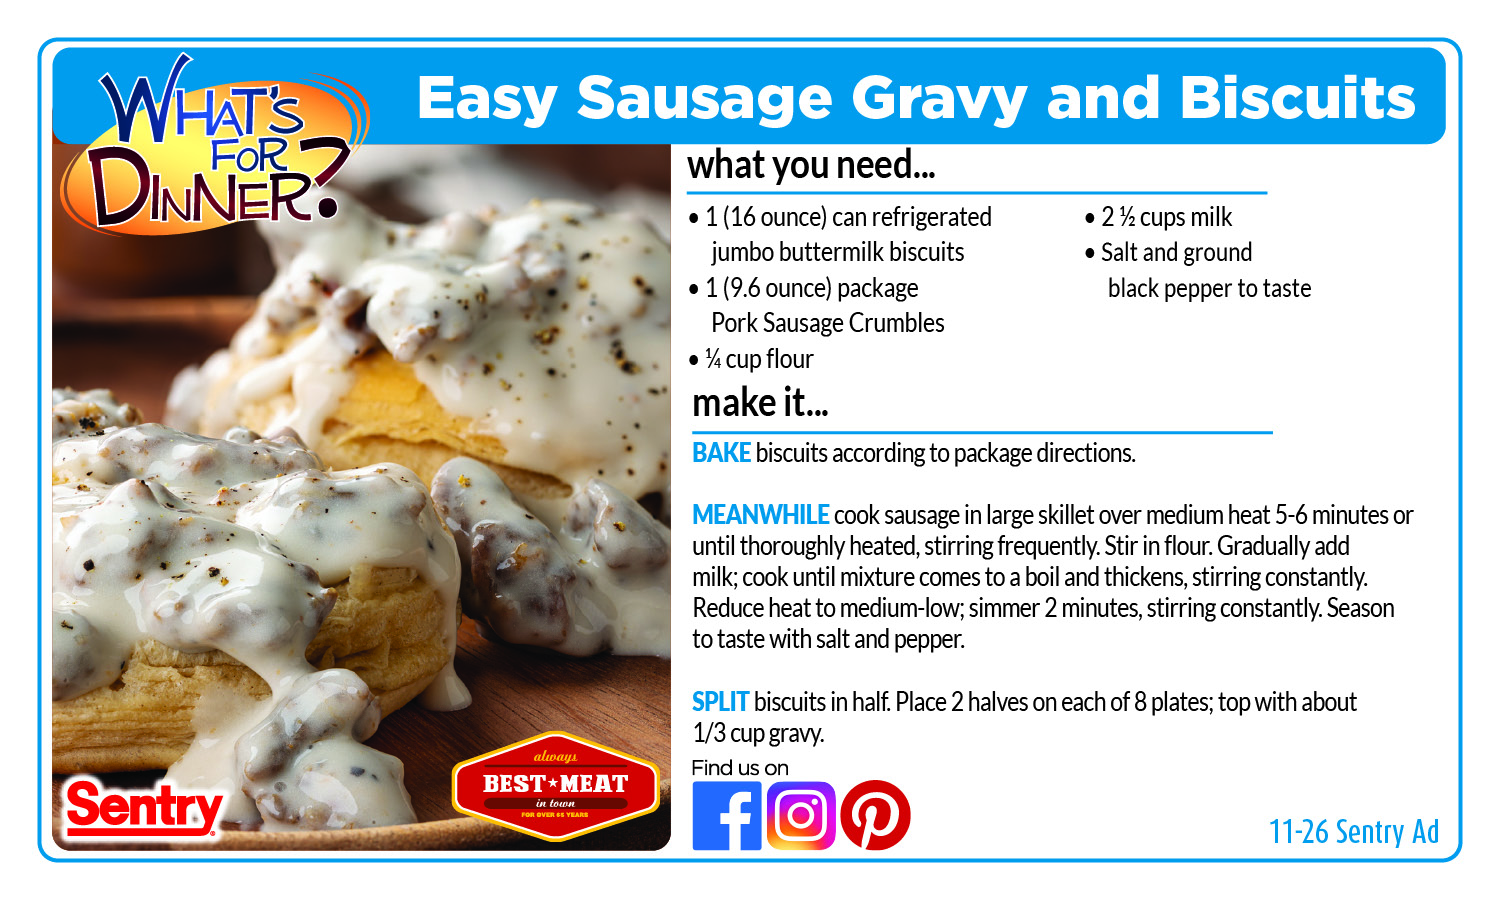 Recipe card for easy sausage gravy and biscuits